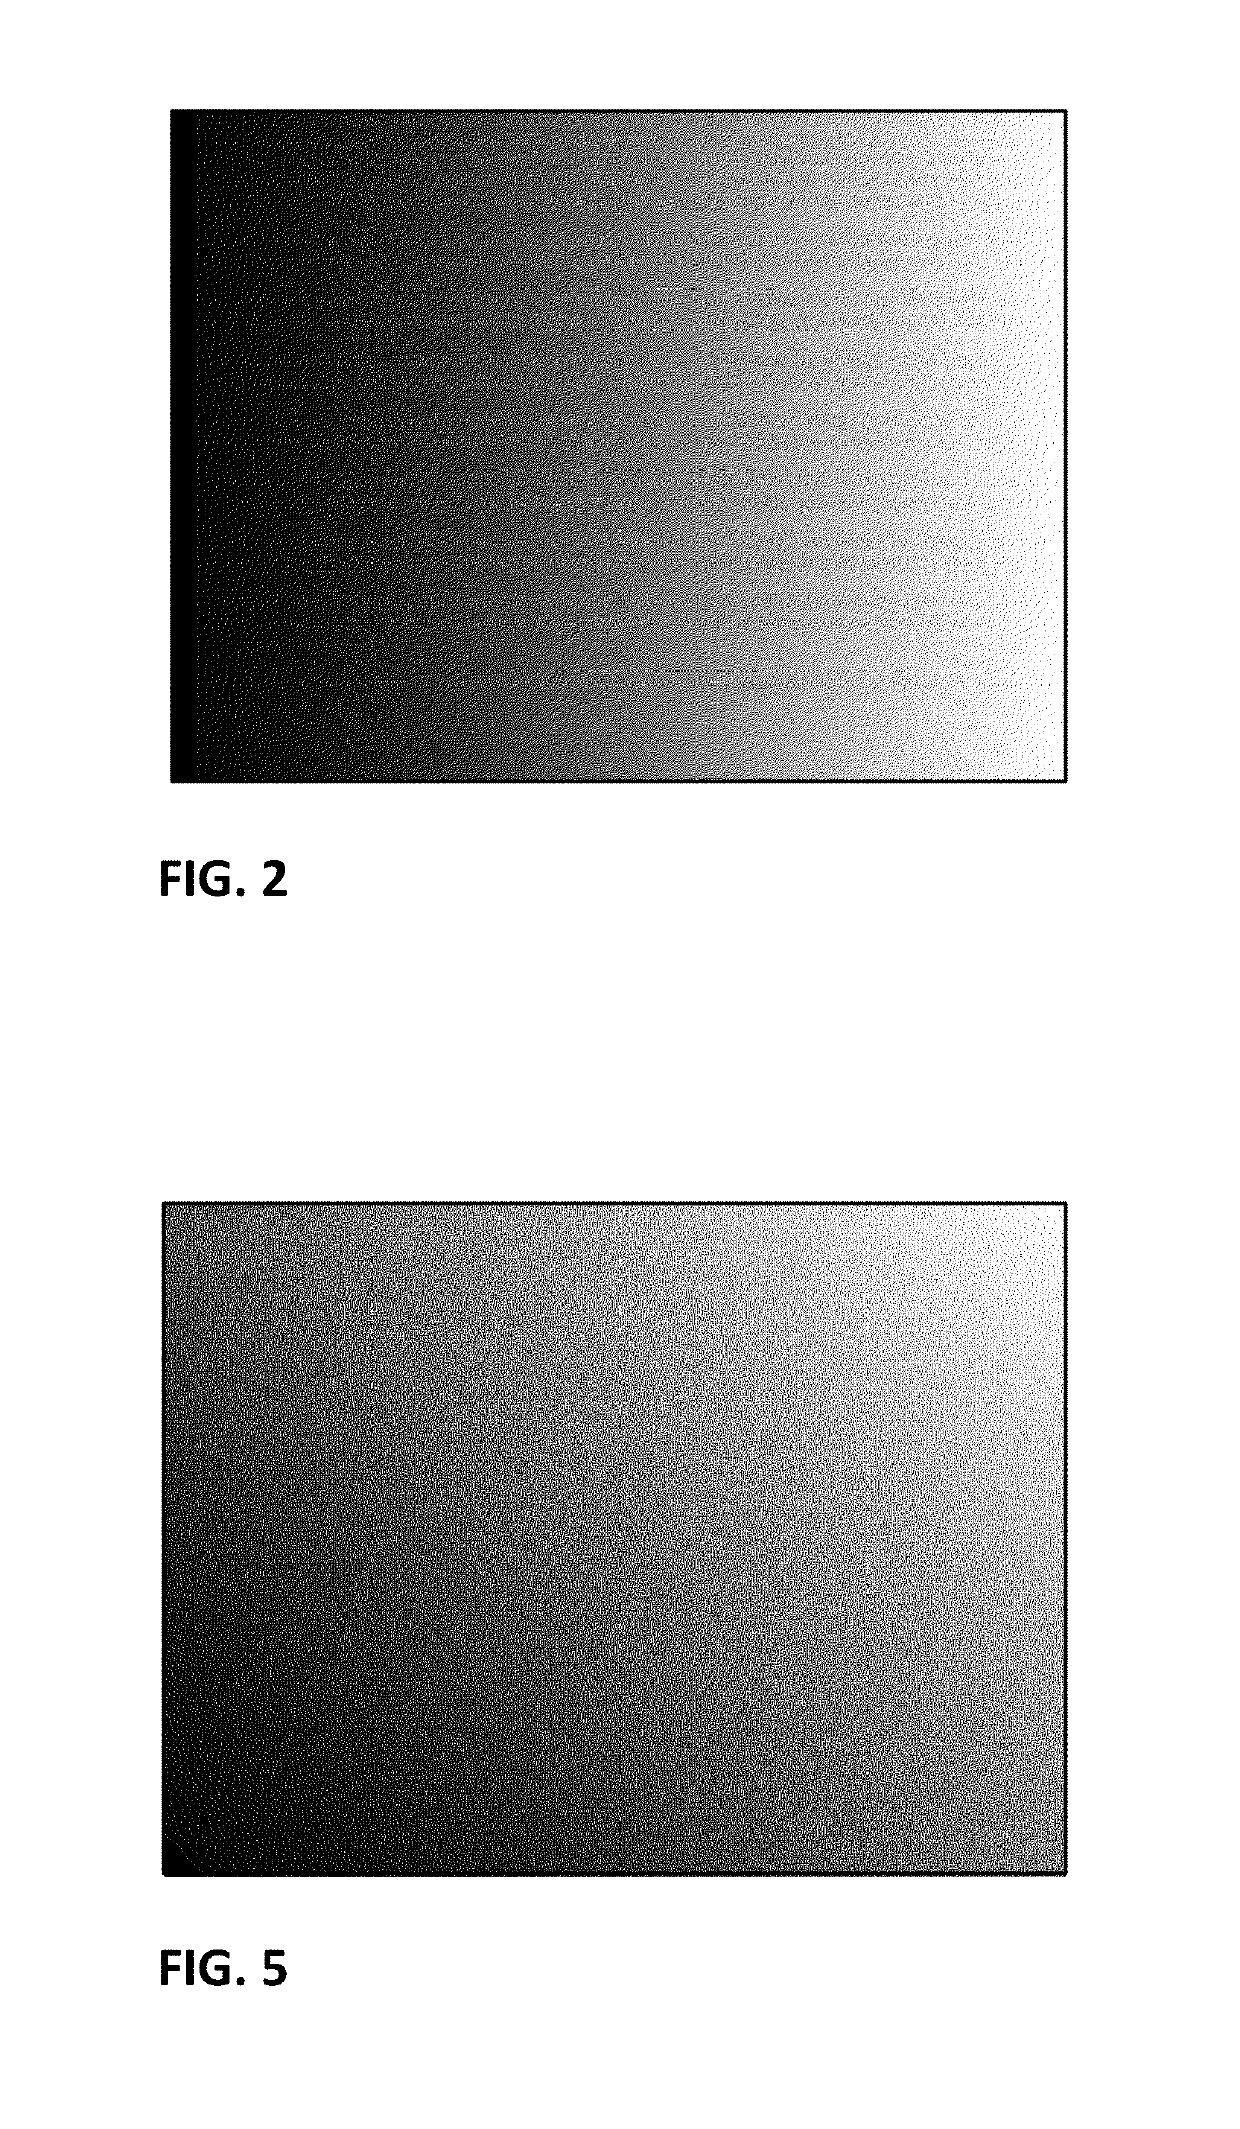 Methods and arrangements for configuring industrial inspection systems